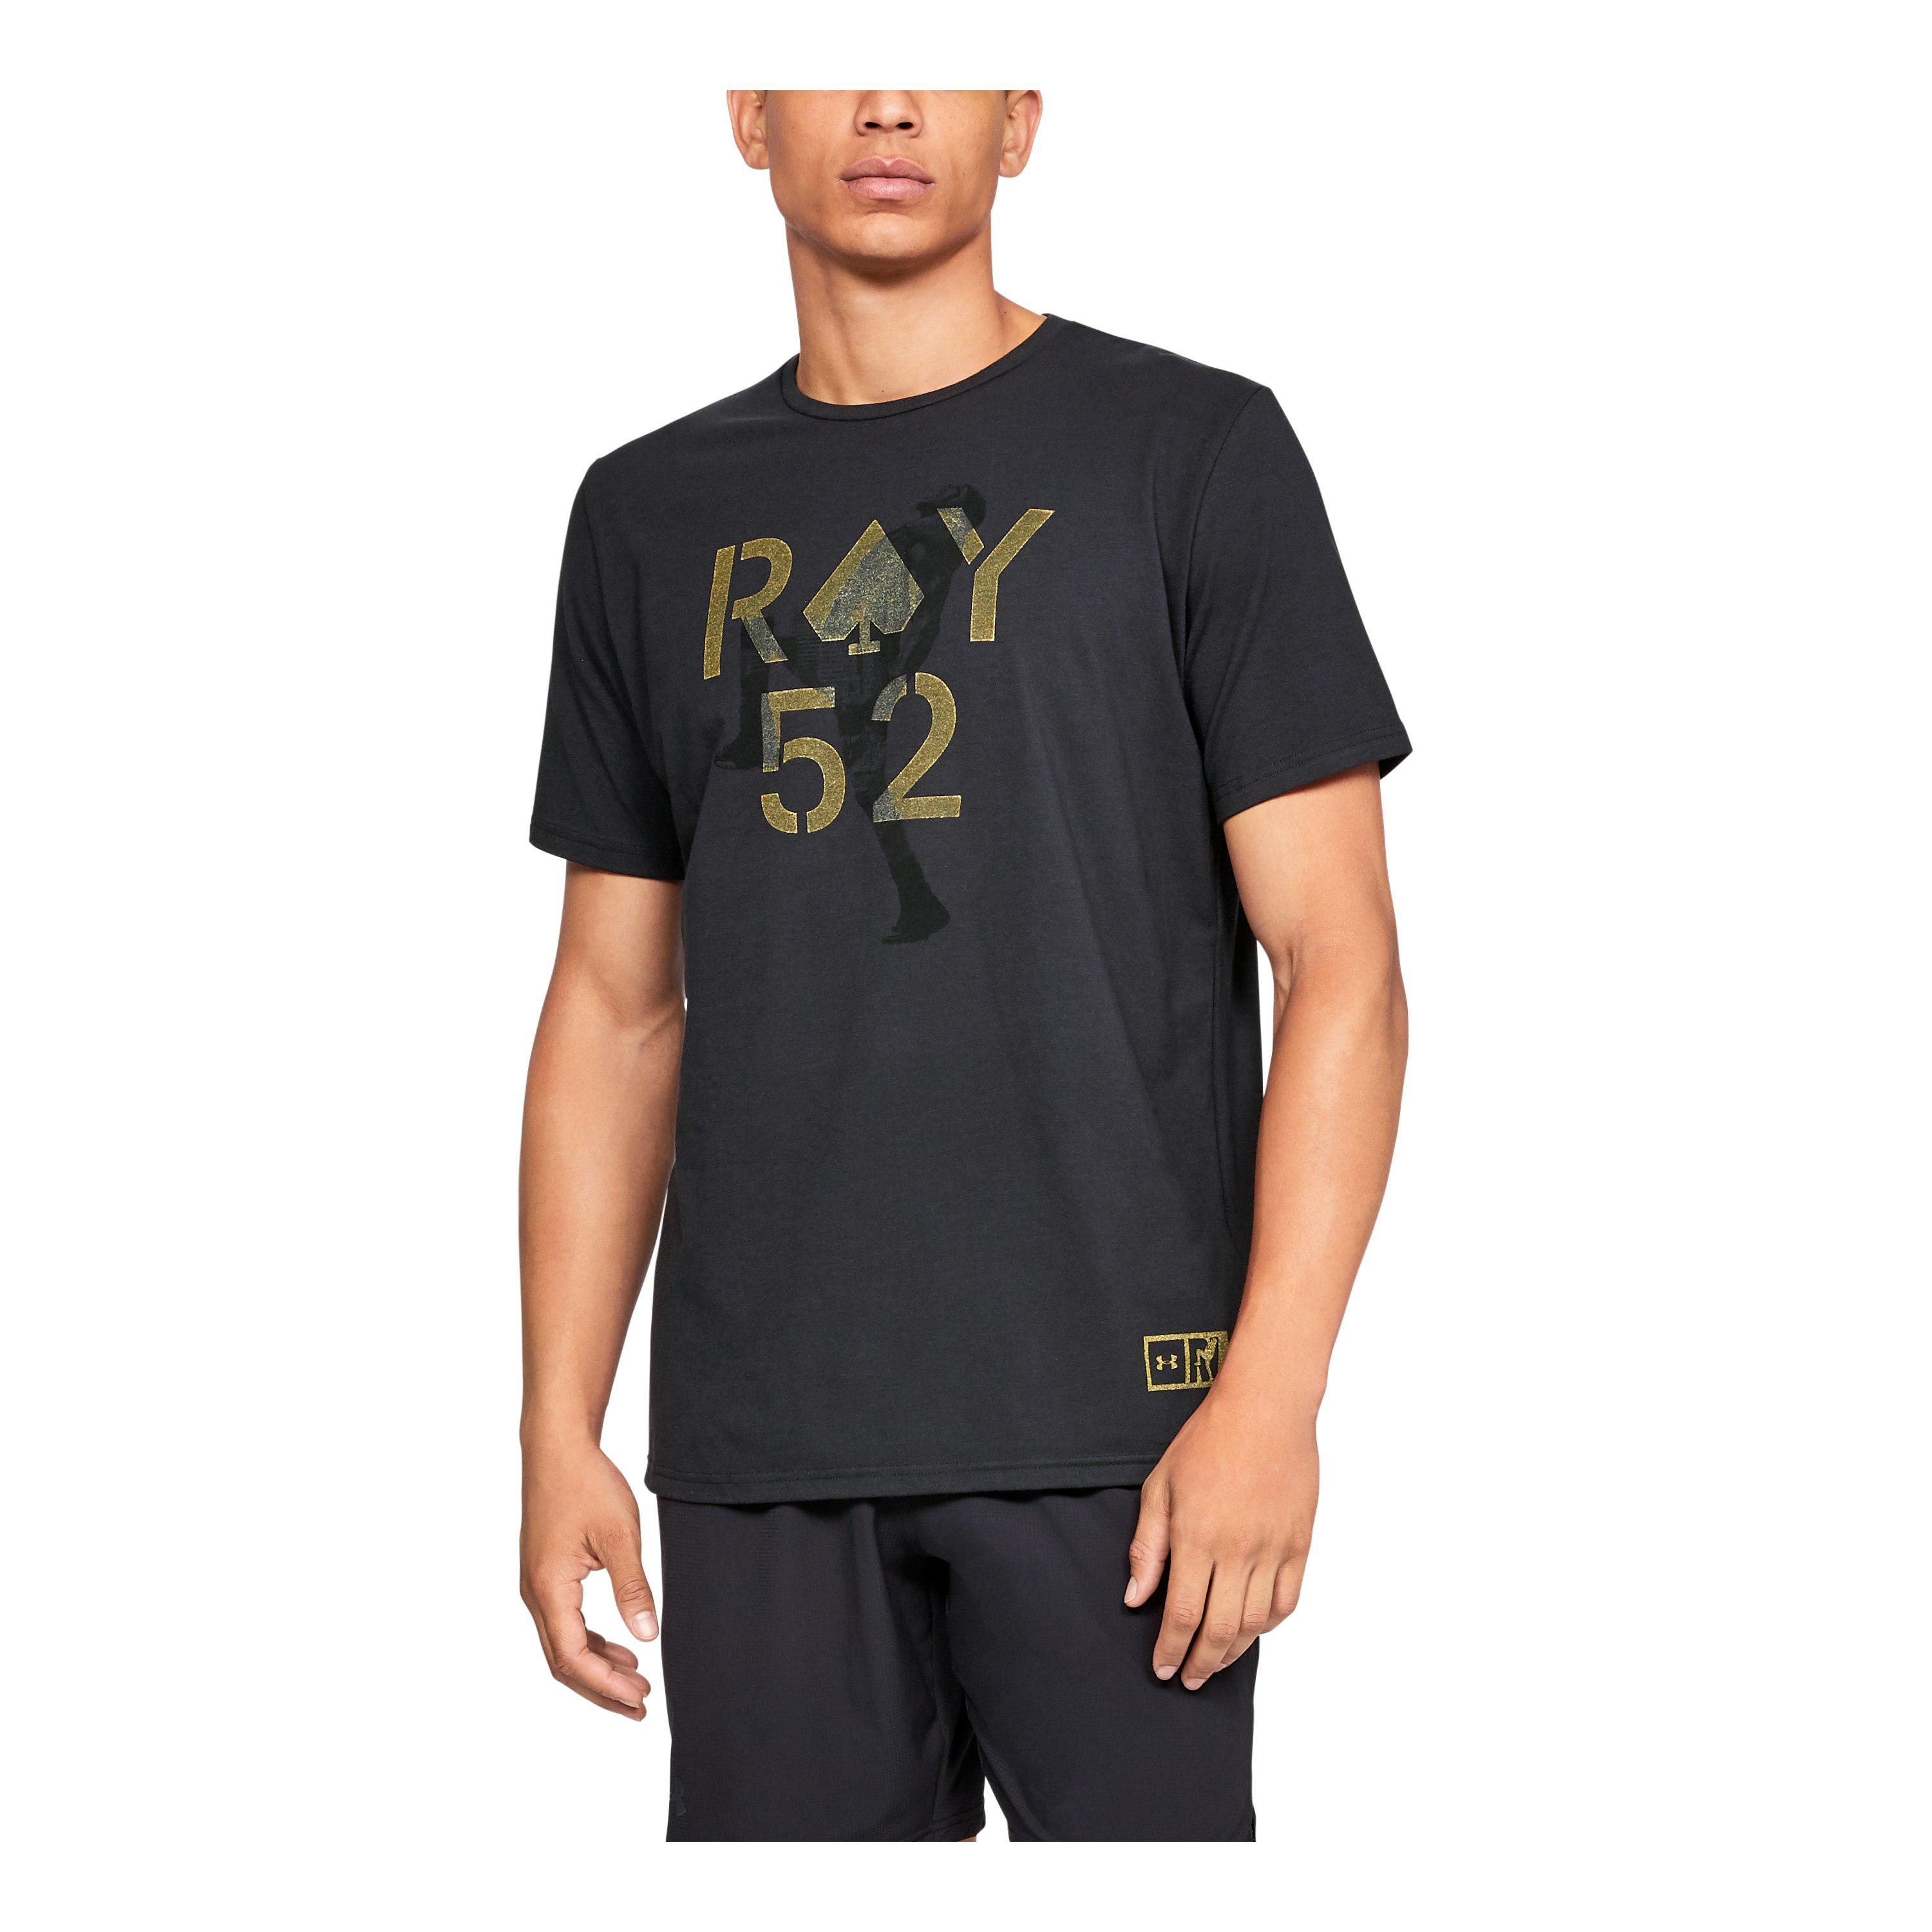 ray lewis t shirt